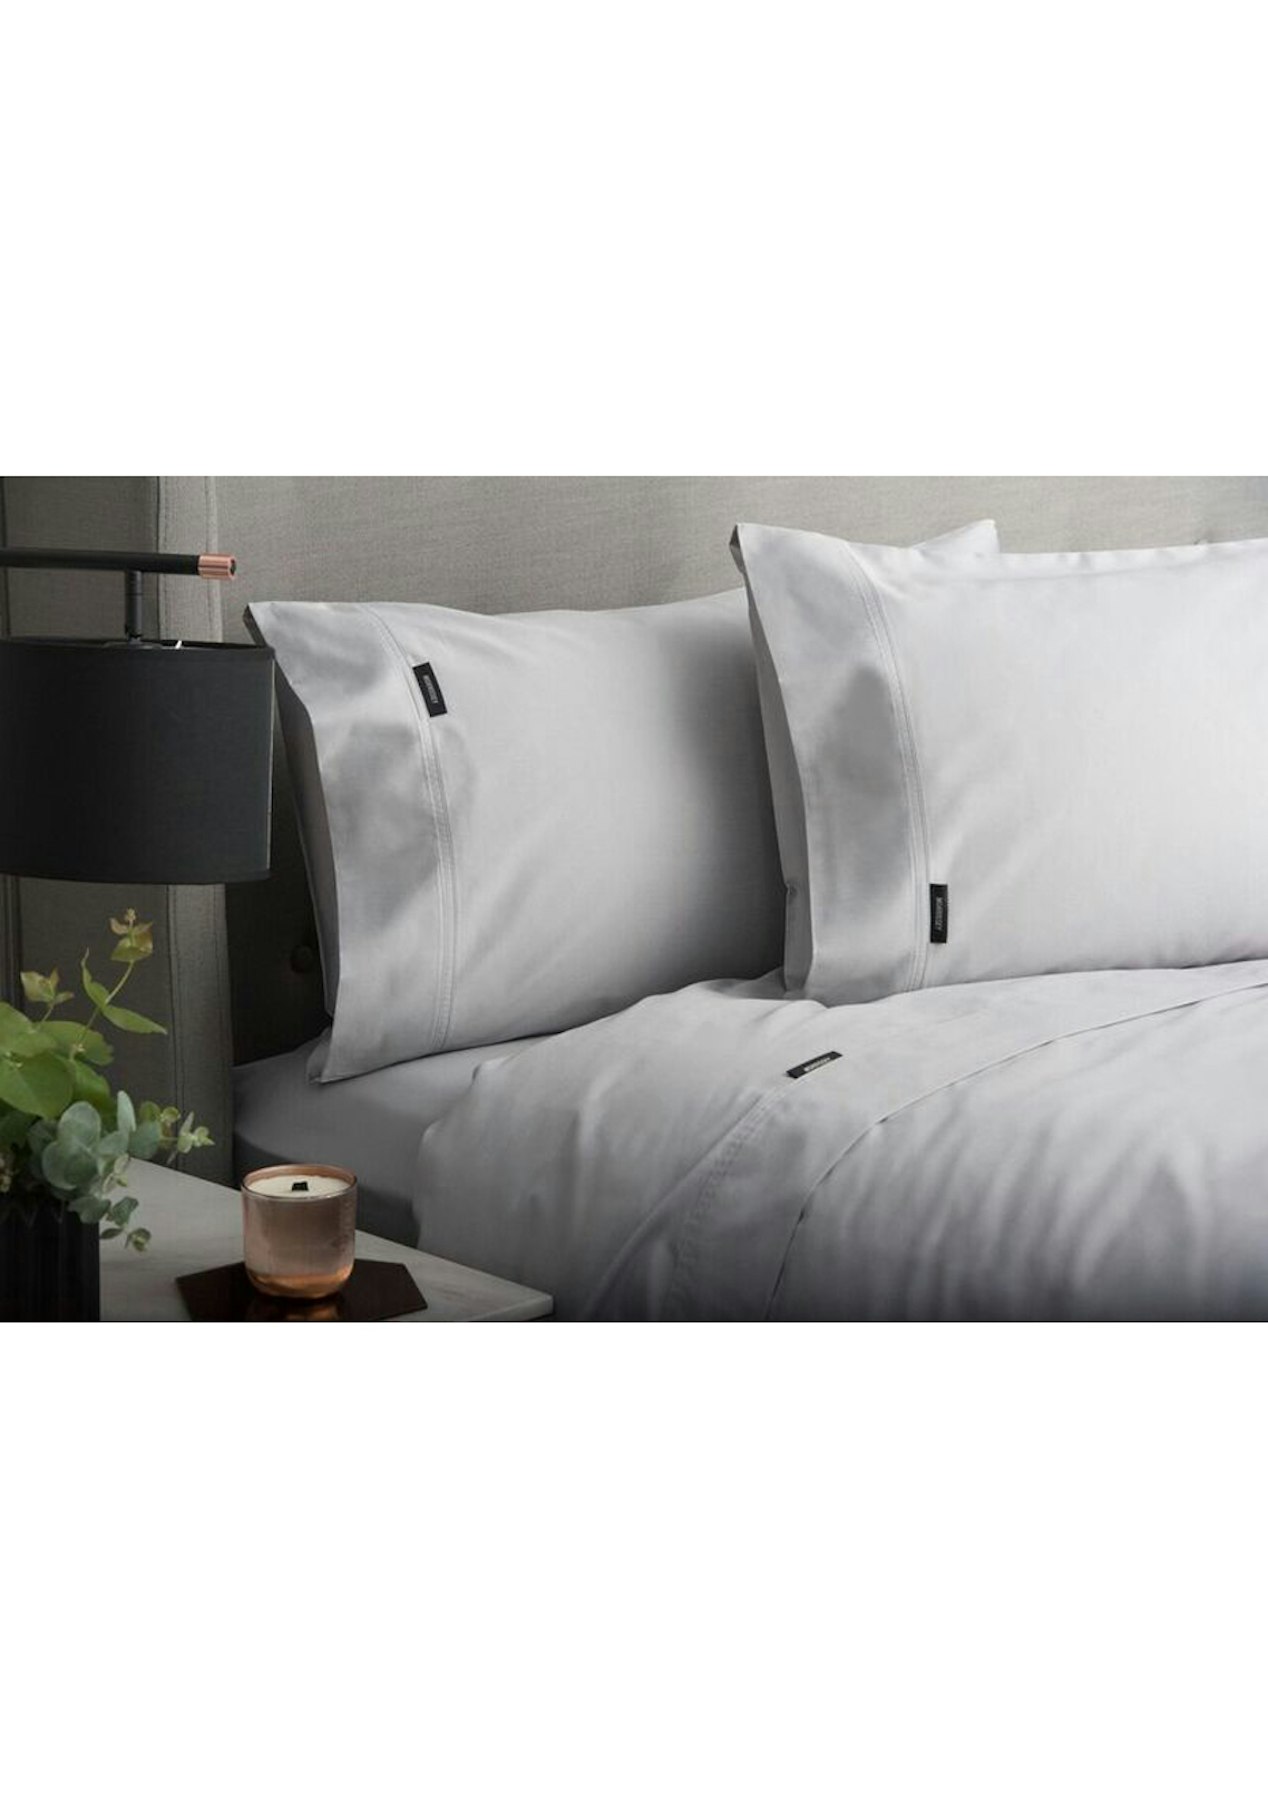 Madison Luxury Home Sheets 1000 Thread Count - Sheet